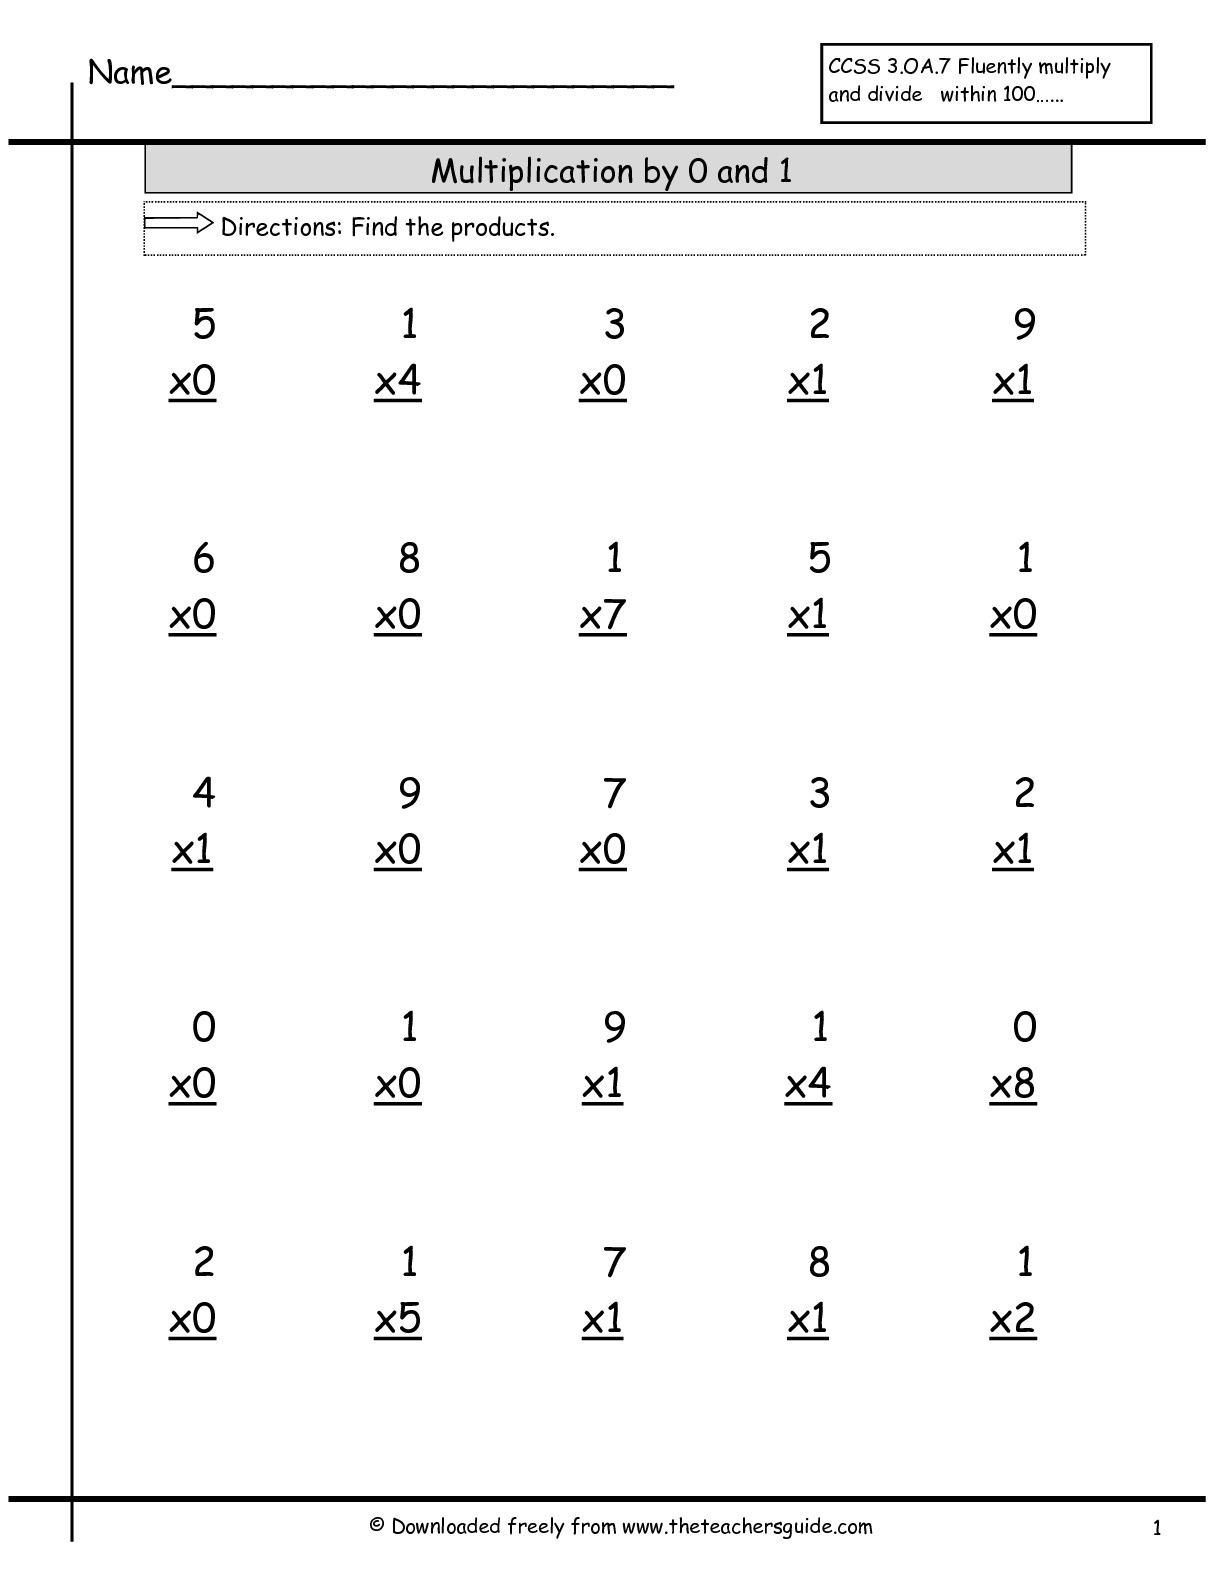 Multiplication Facts Worksheets From The Teacher's Guide throughout Multiplication X10 Worksheets